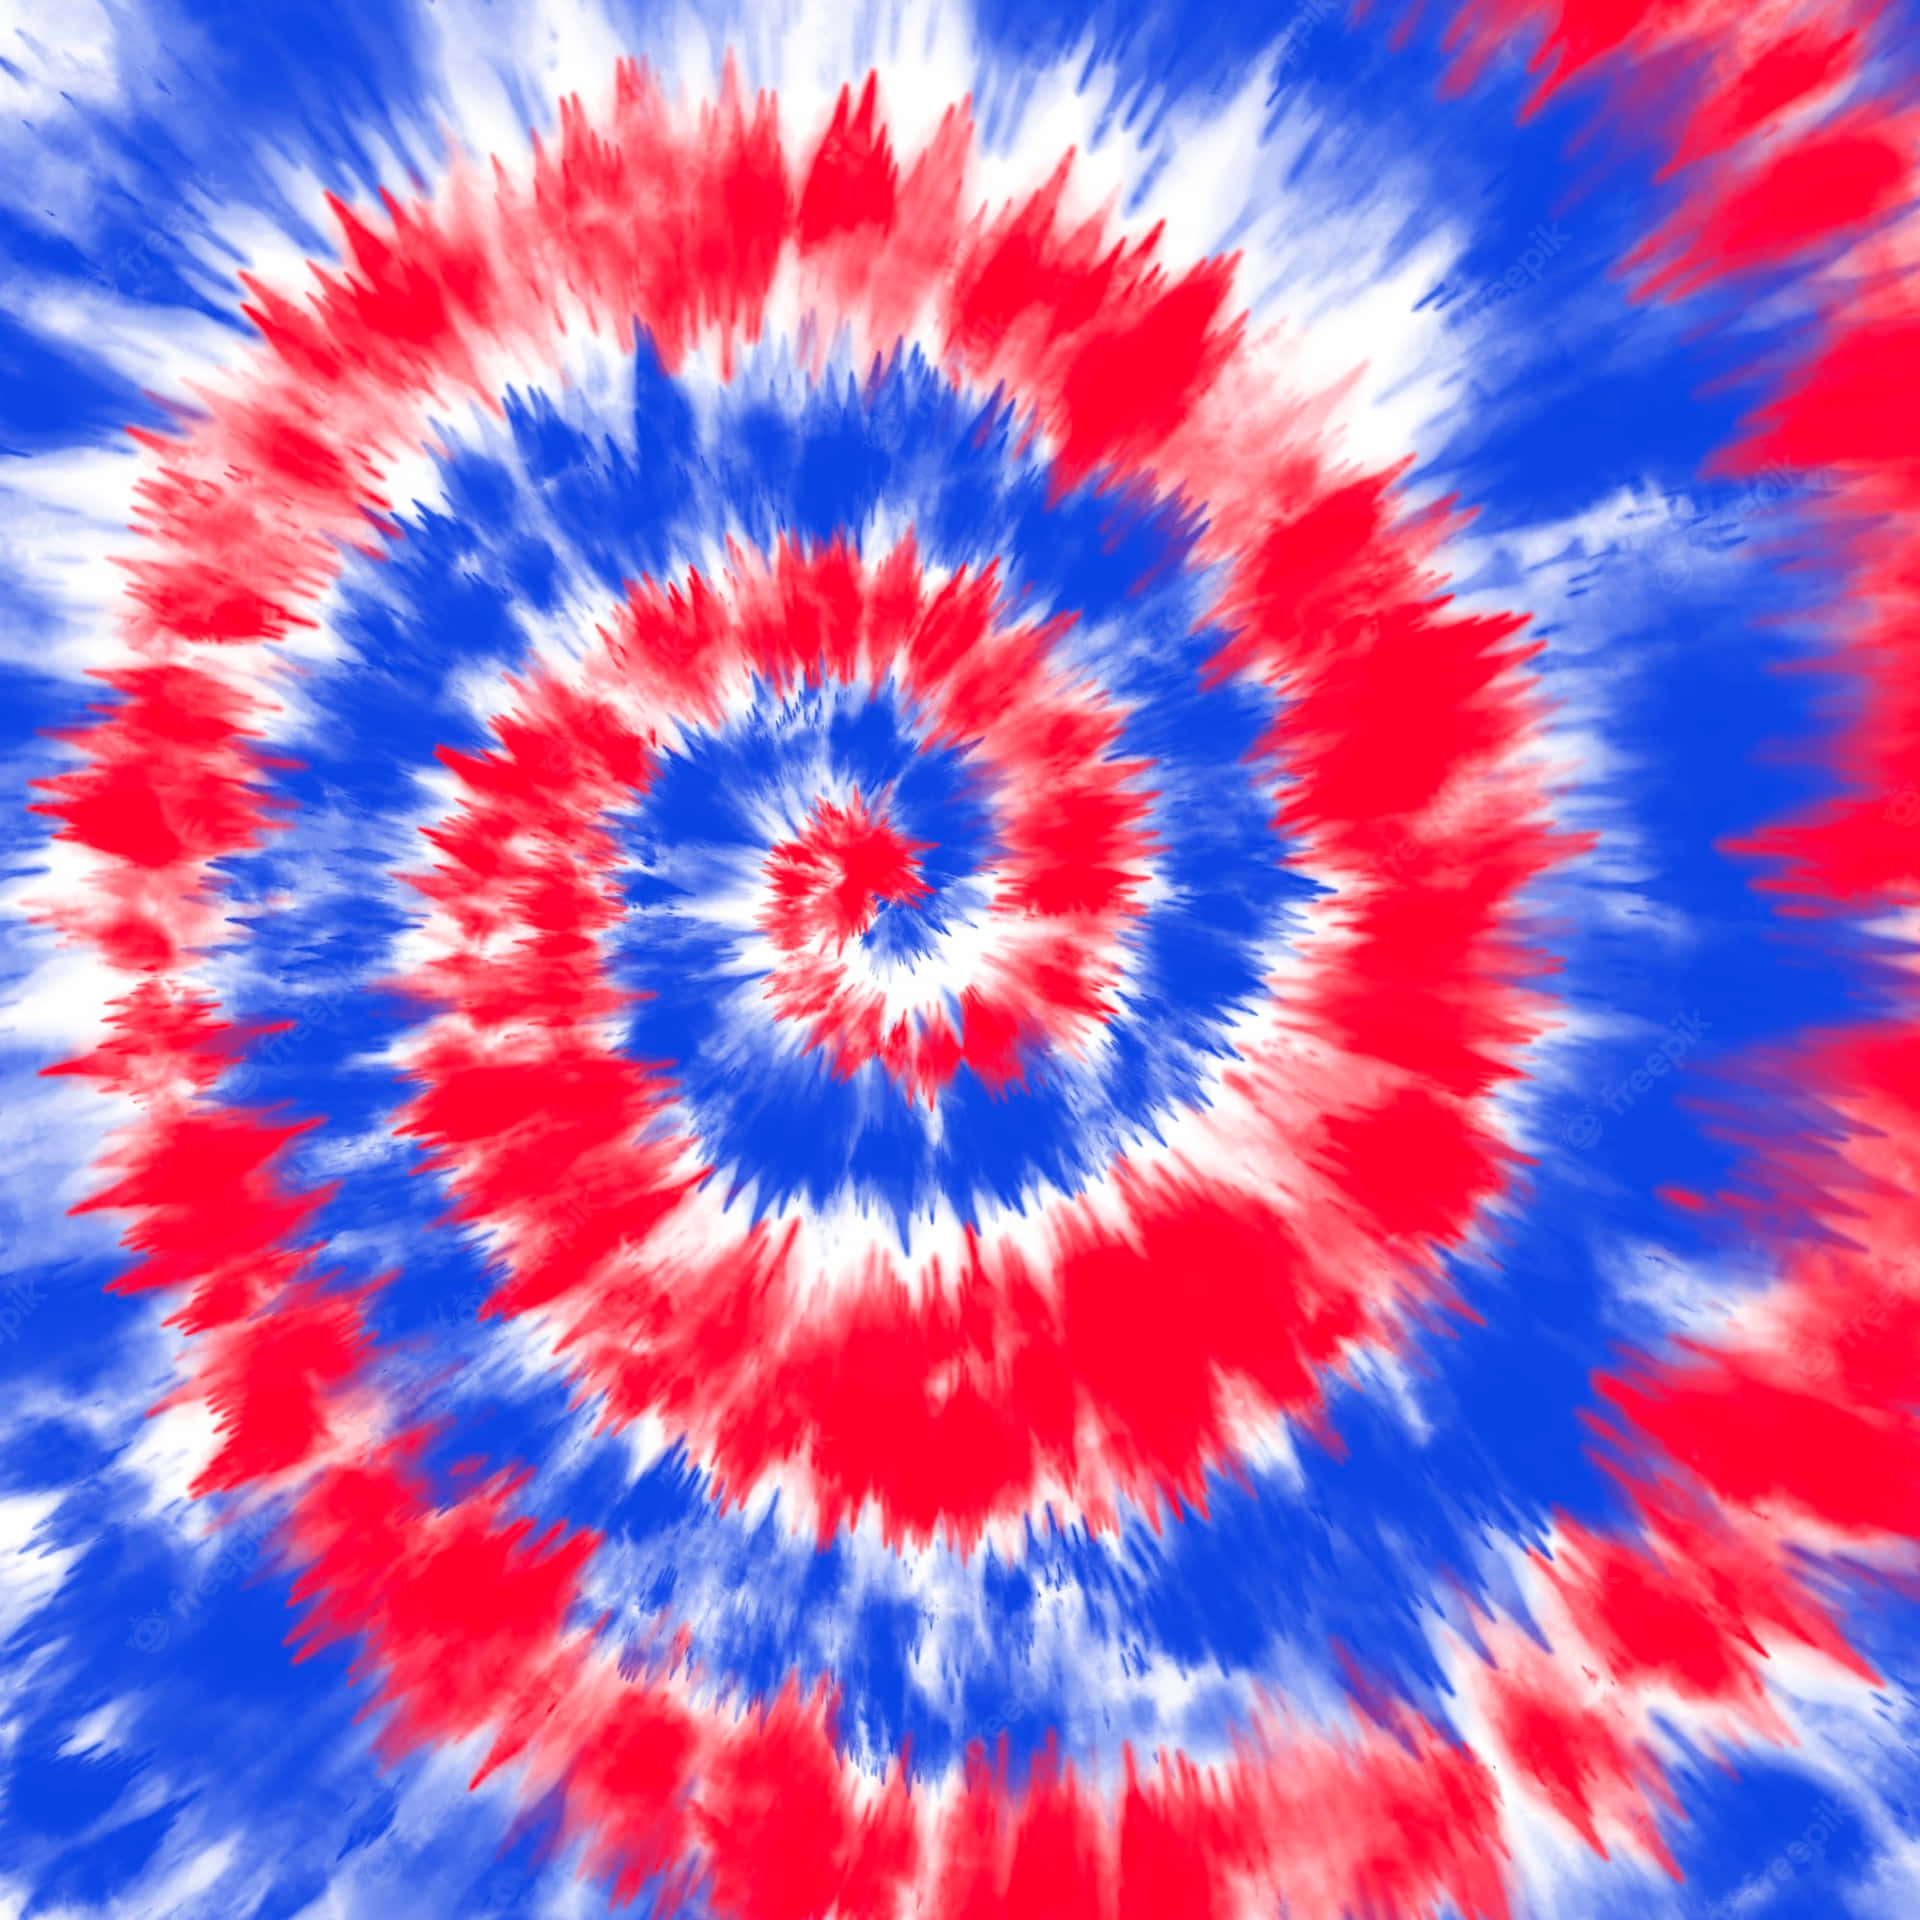 "Create a mesmerizing display with this eye-catching blue tie-dye design" Wallpaper